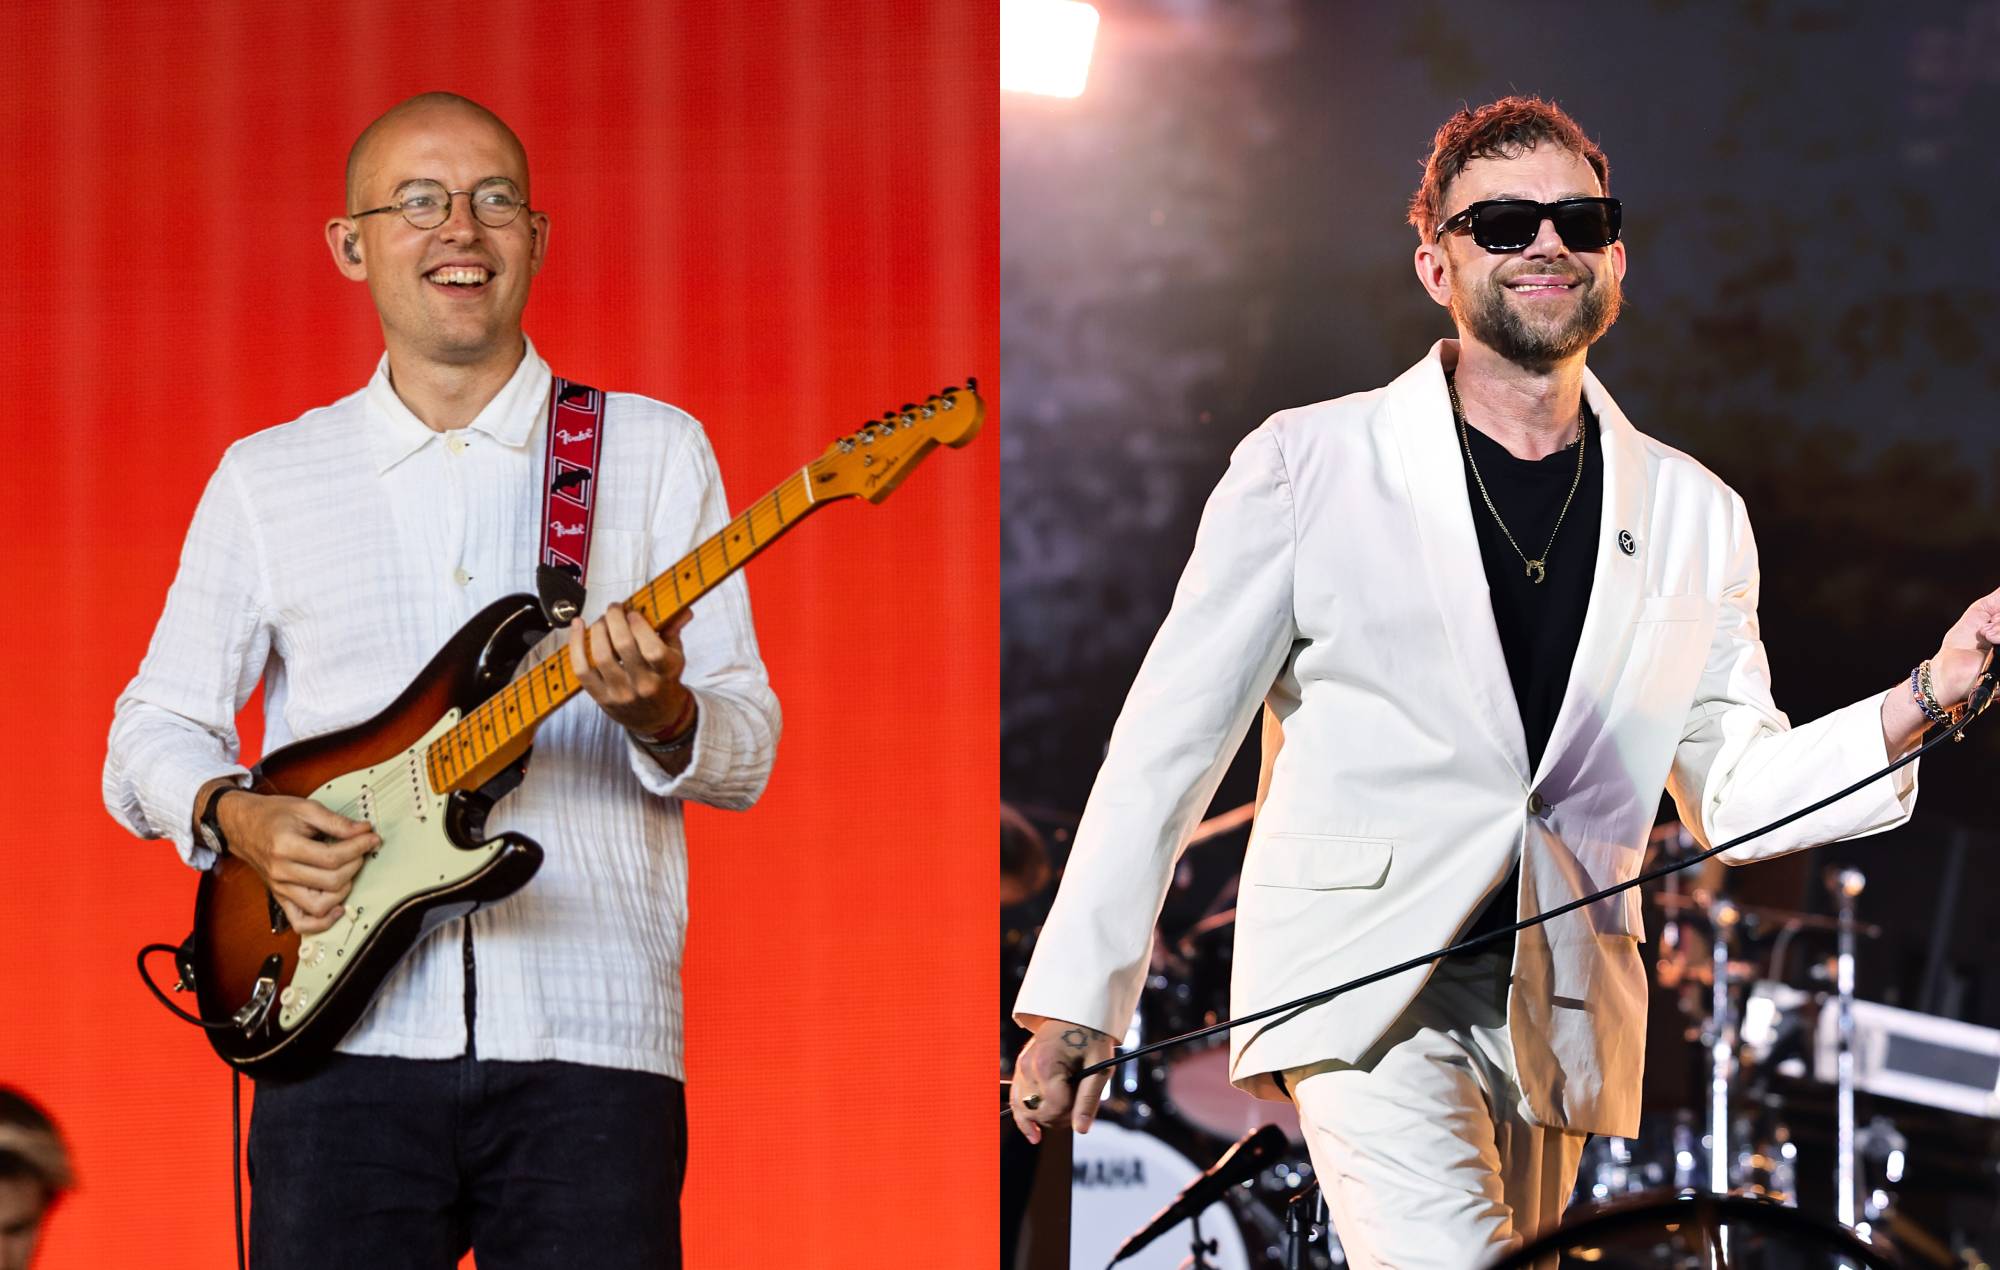 Bombay Bicycle Club bring out Damon Albarn as surprise guest during Glastonbury set